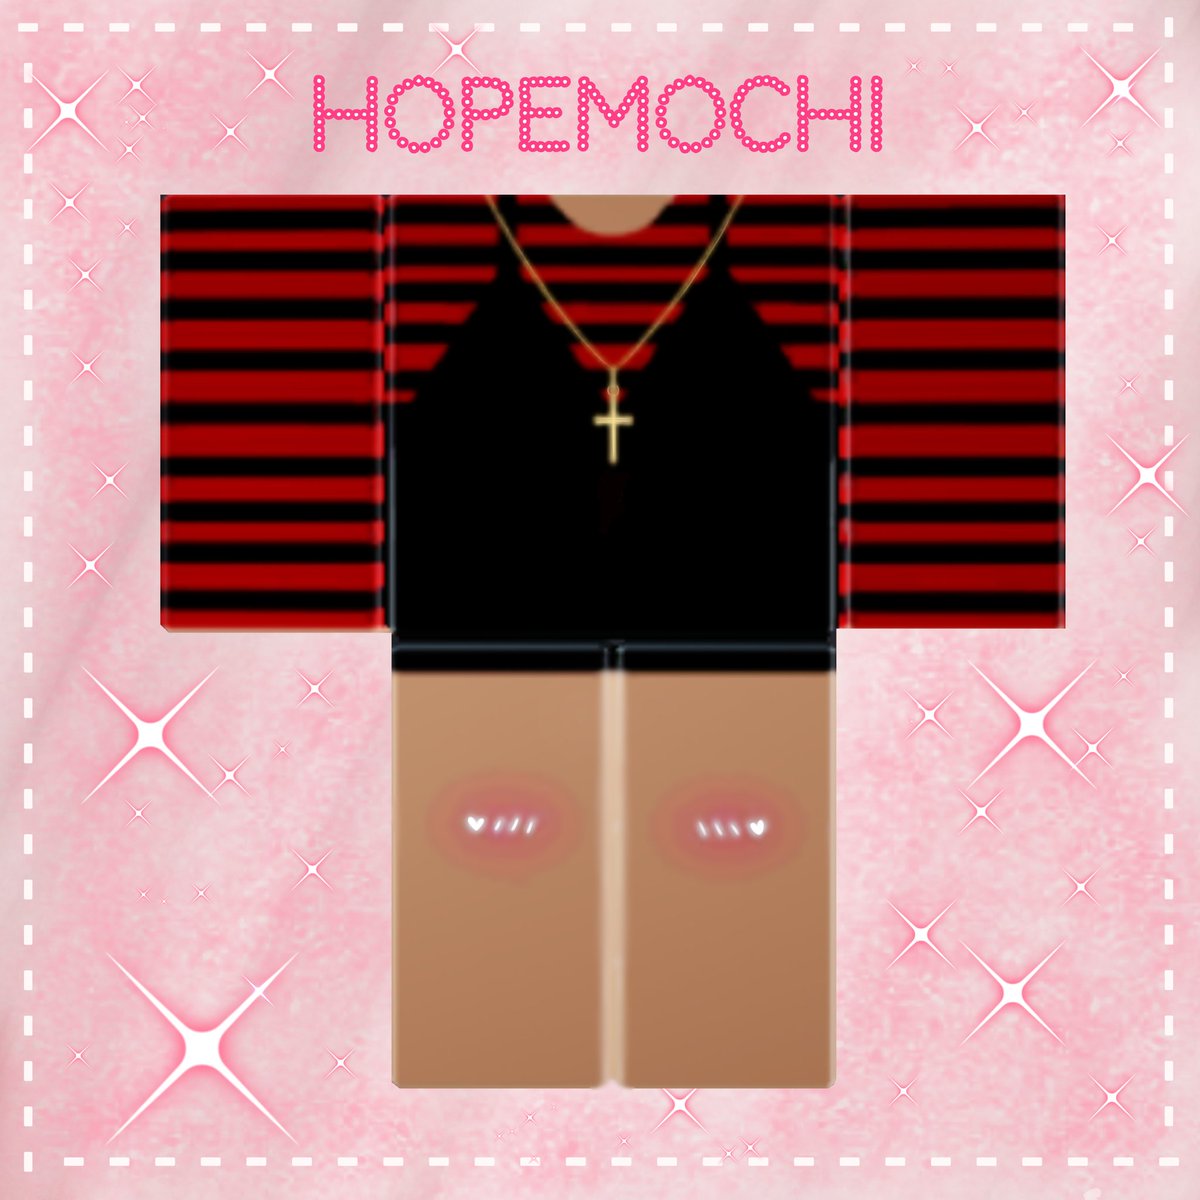 Hopemochi On Twitter Lovely And Cool Outfit Red Striped Shirt With Black Dress Pants Link Https T Co E9f9vtep7n Shirt Link Https T Co T5kpf7oeva Follow Me For More Outfits Roblox Robloxdev Robloxclothing Robloxdesigner Robloxoutfit - black on white striped roblox